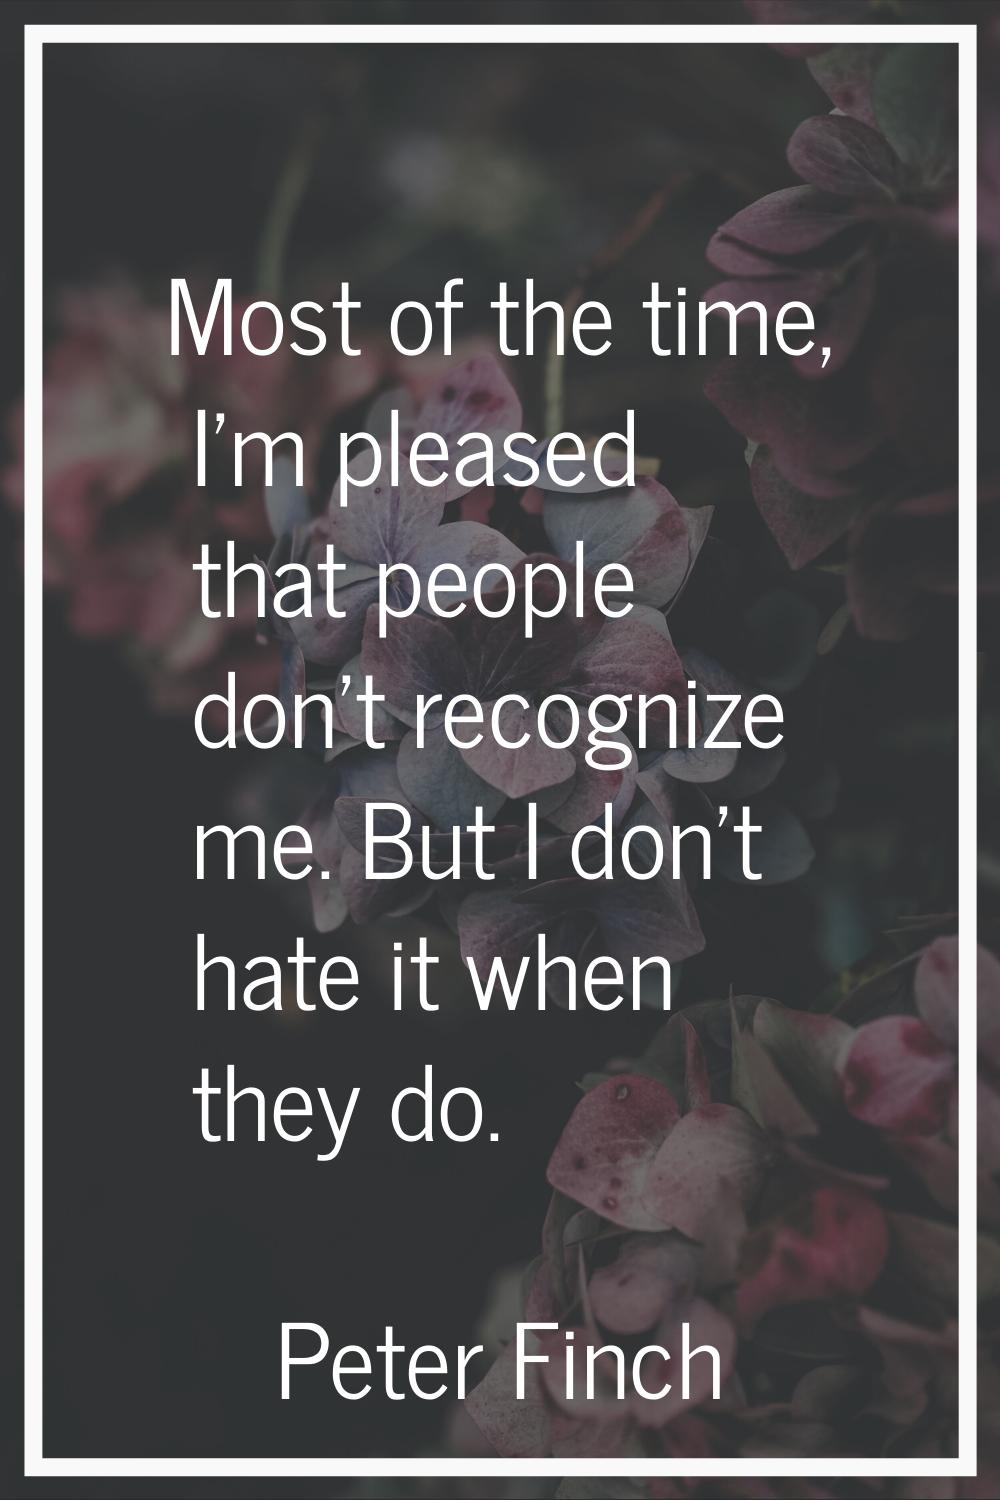 Most of the time, I'm pleased that people don't recognize me. But I don't hate it when they do.